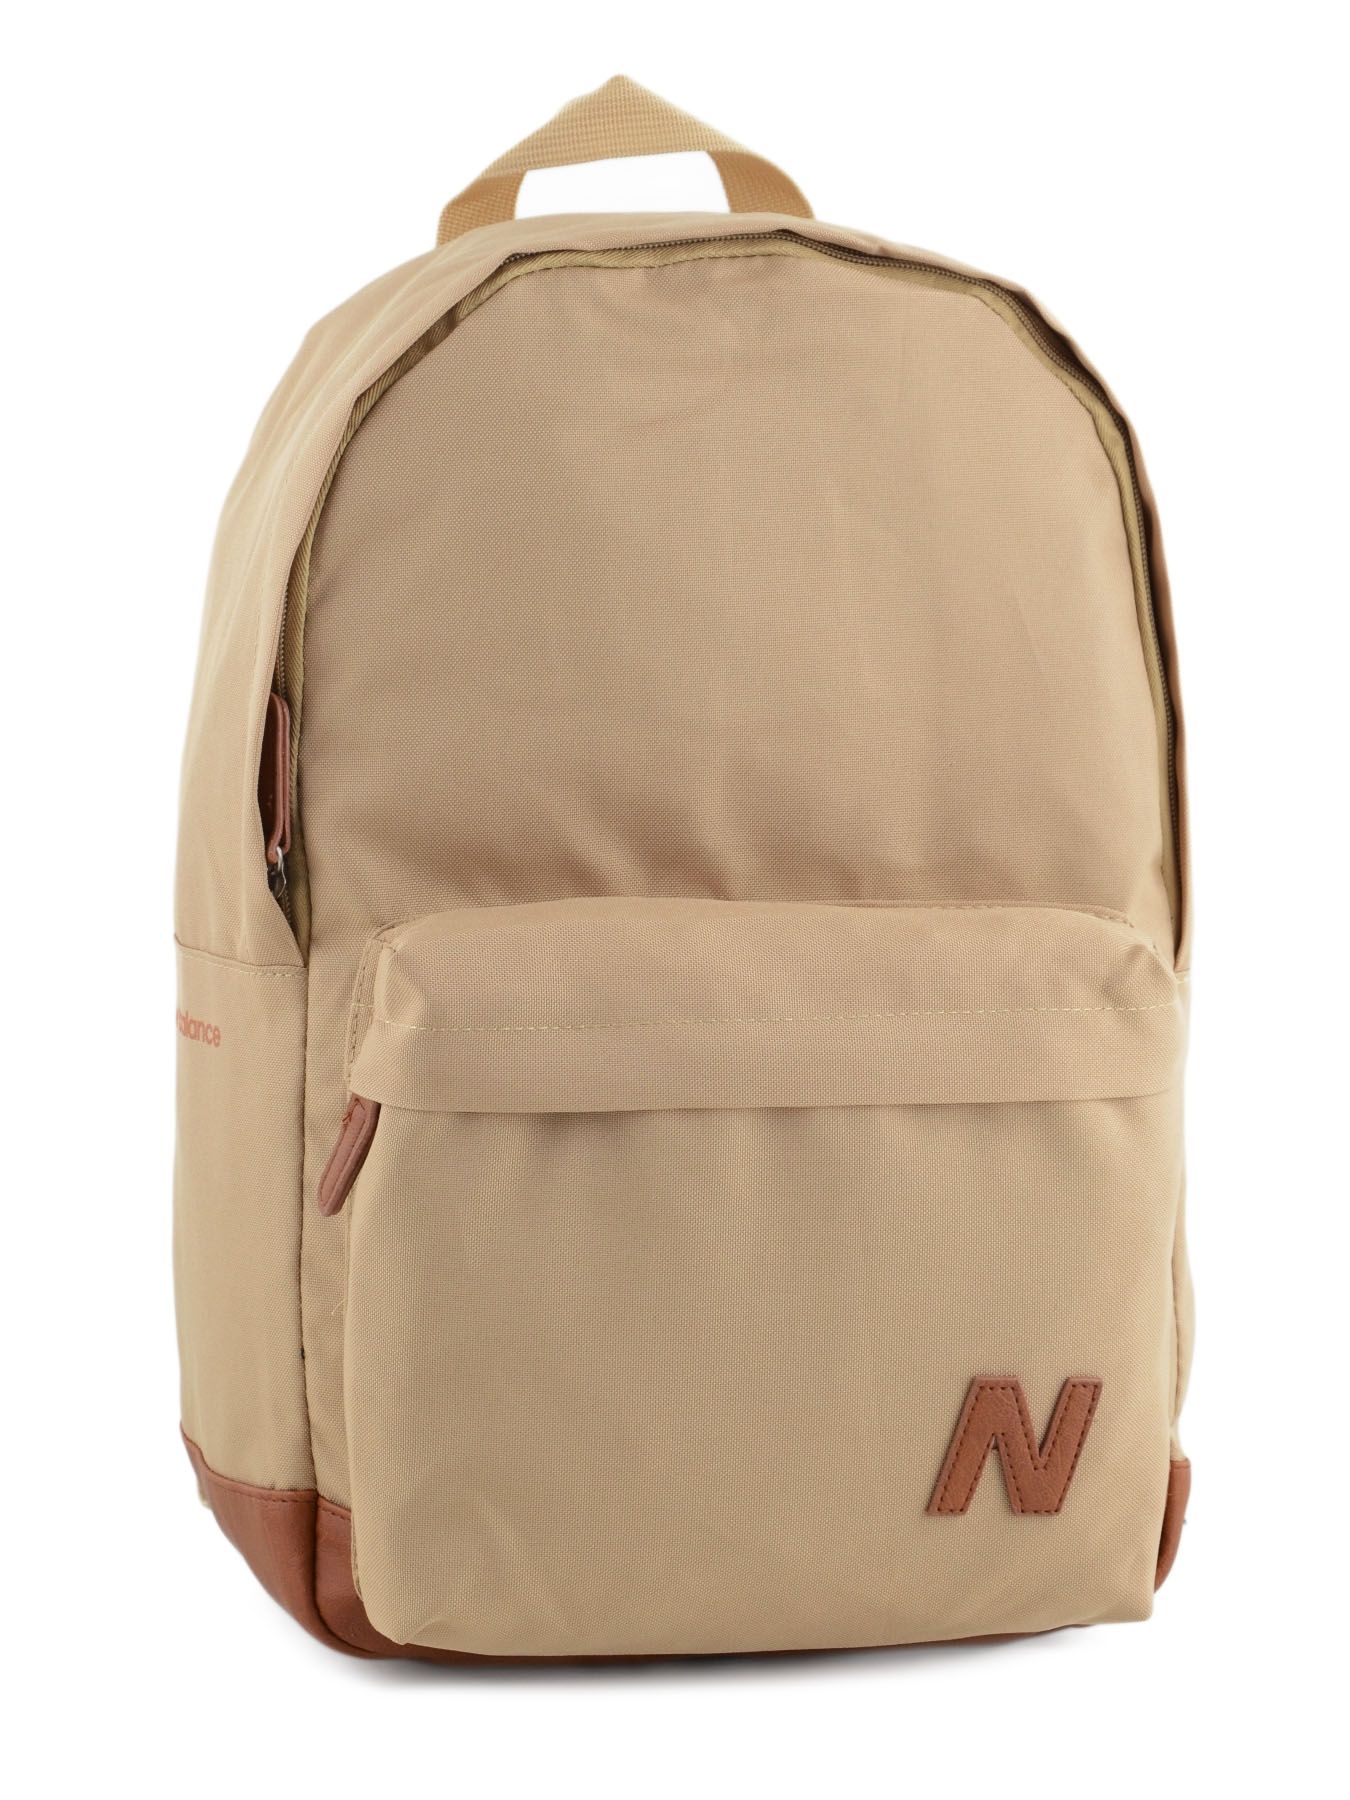 New Balance Backpack Ascent Best prices